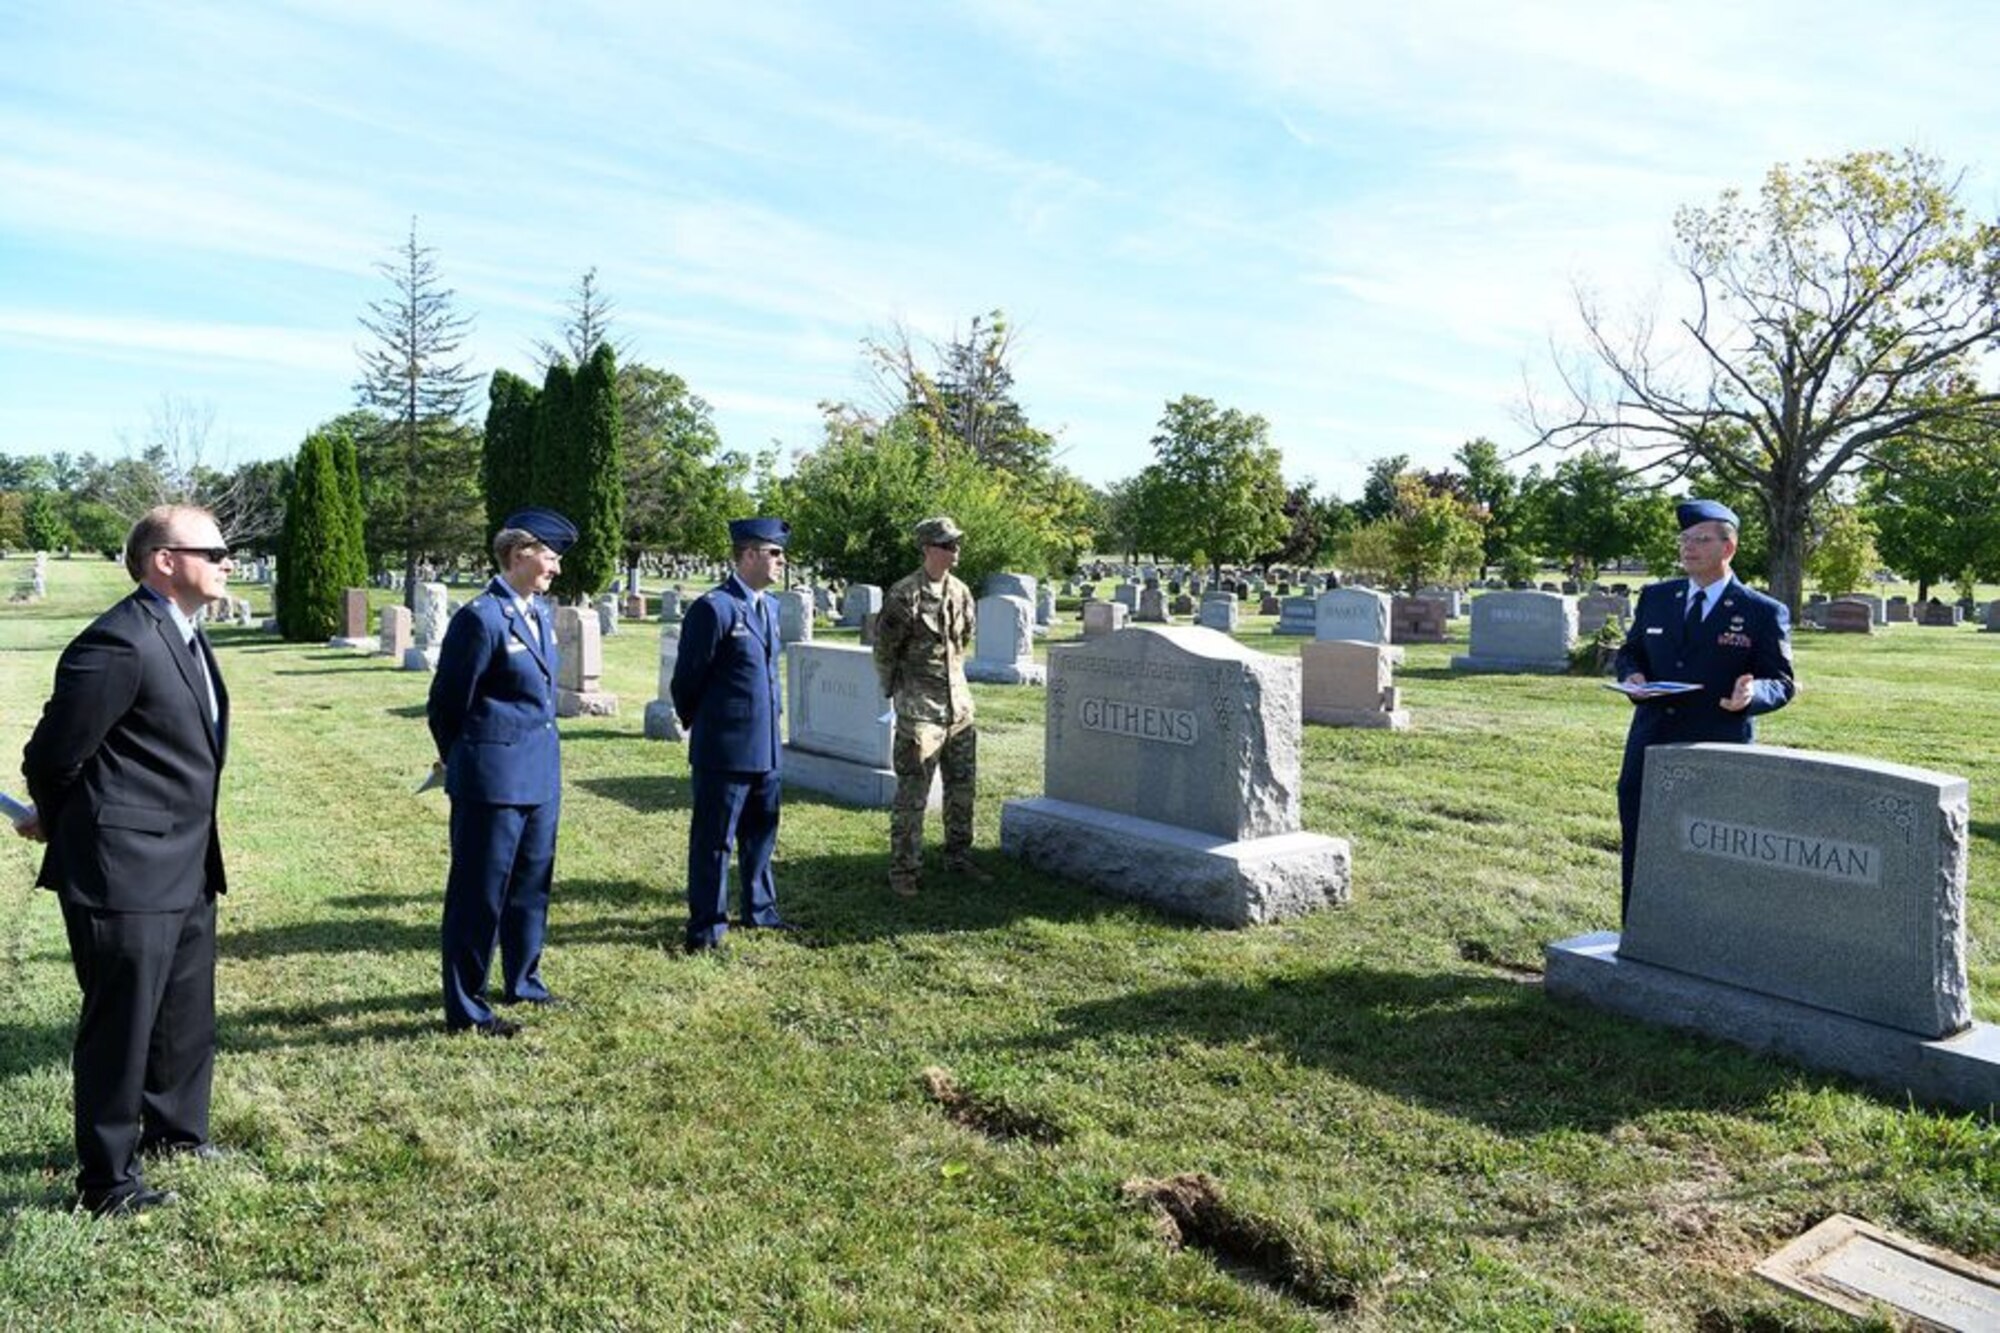 Tech. Sgt. Richard Herron, the base historian and an Airman assigned to the 162nd Operations Group, presents the new headstone for Lt. Richard Christman, a pilot assigned to the 162nd Fighter Squadron in 1948, September 4, 2020 at Dayton Memorial Park Cemetery in Dayton, Ohio. On September 4, 1948, Christman was flying a routine navigational training mission above Dayton, Ohio when his F-51’s left wing broke off of the aircraft at several thousand feet in the air. The F-51 crashed and 27-year-old Christman died in the crash. (U.S. Air National Guard photo by Staff Sgt. Amber Mullen)